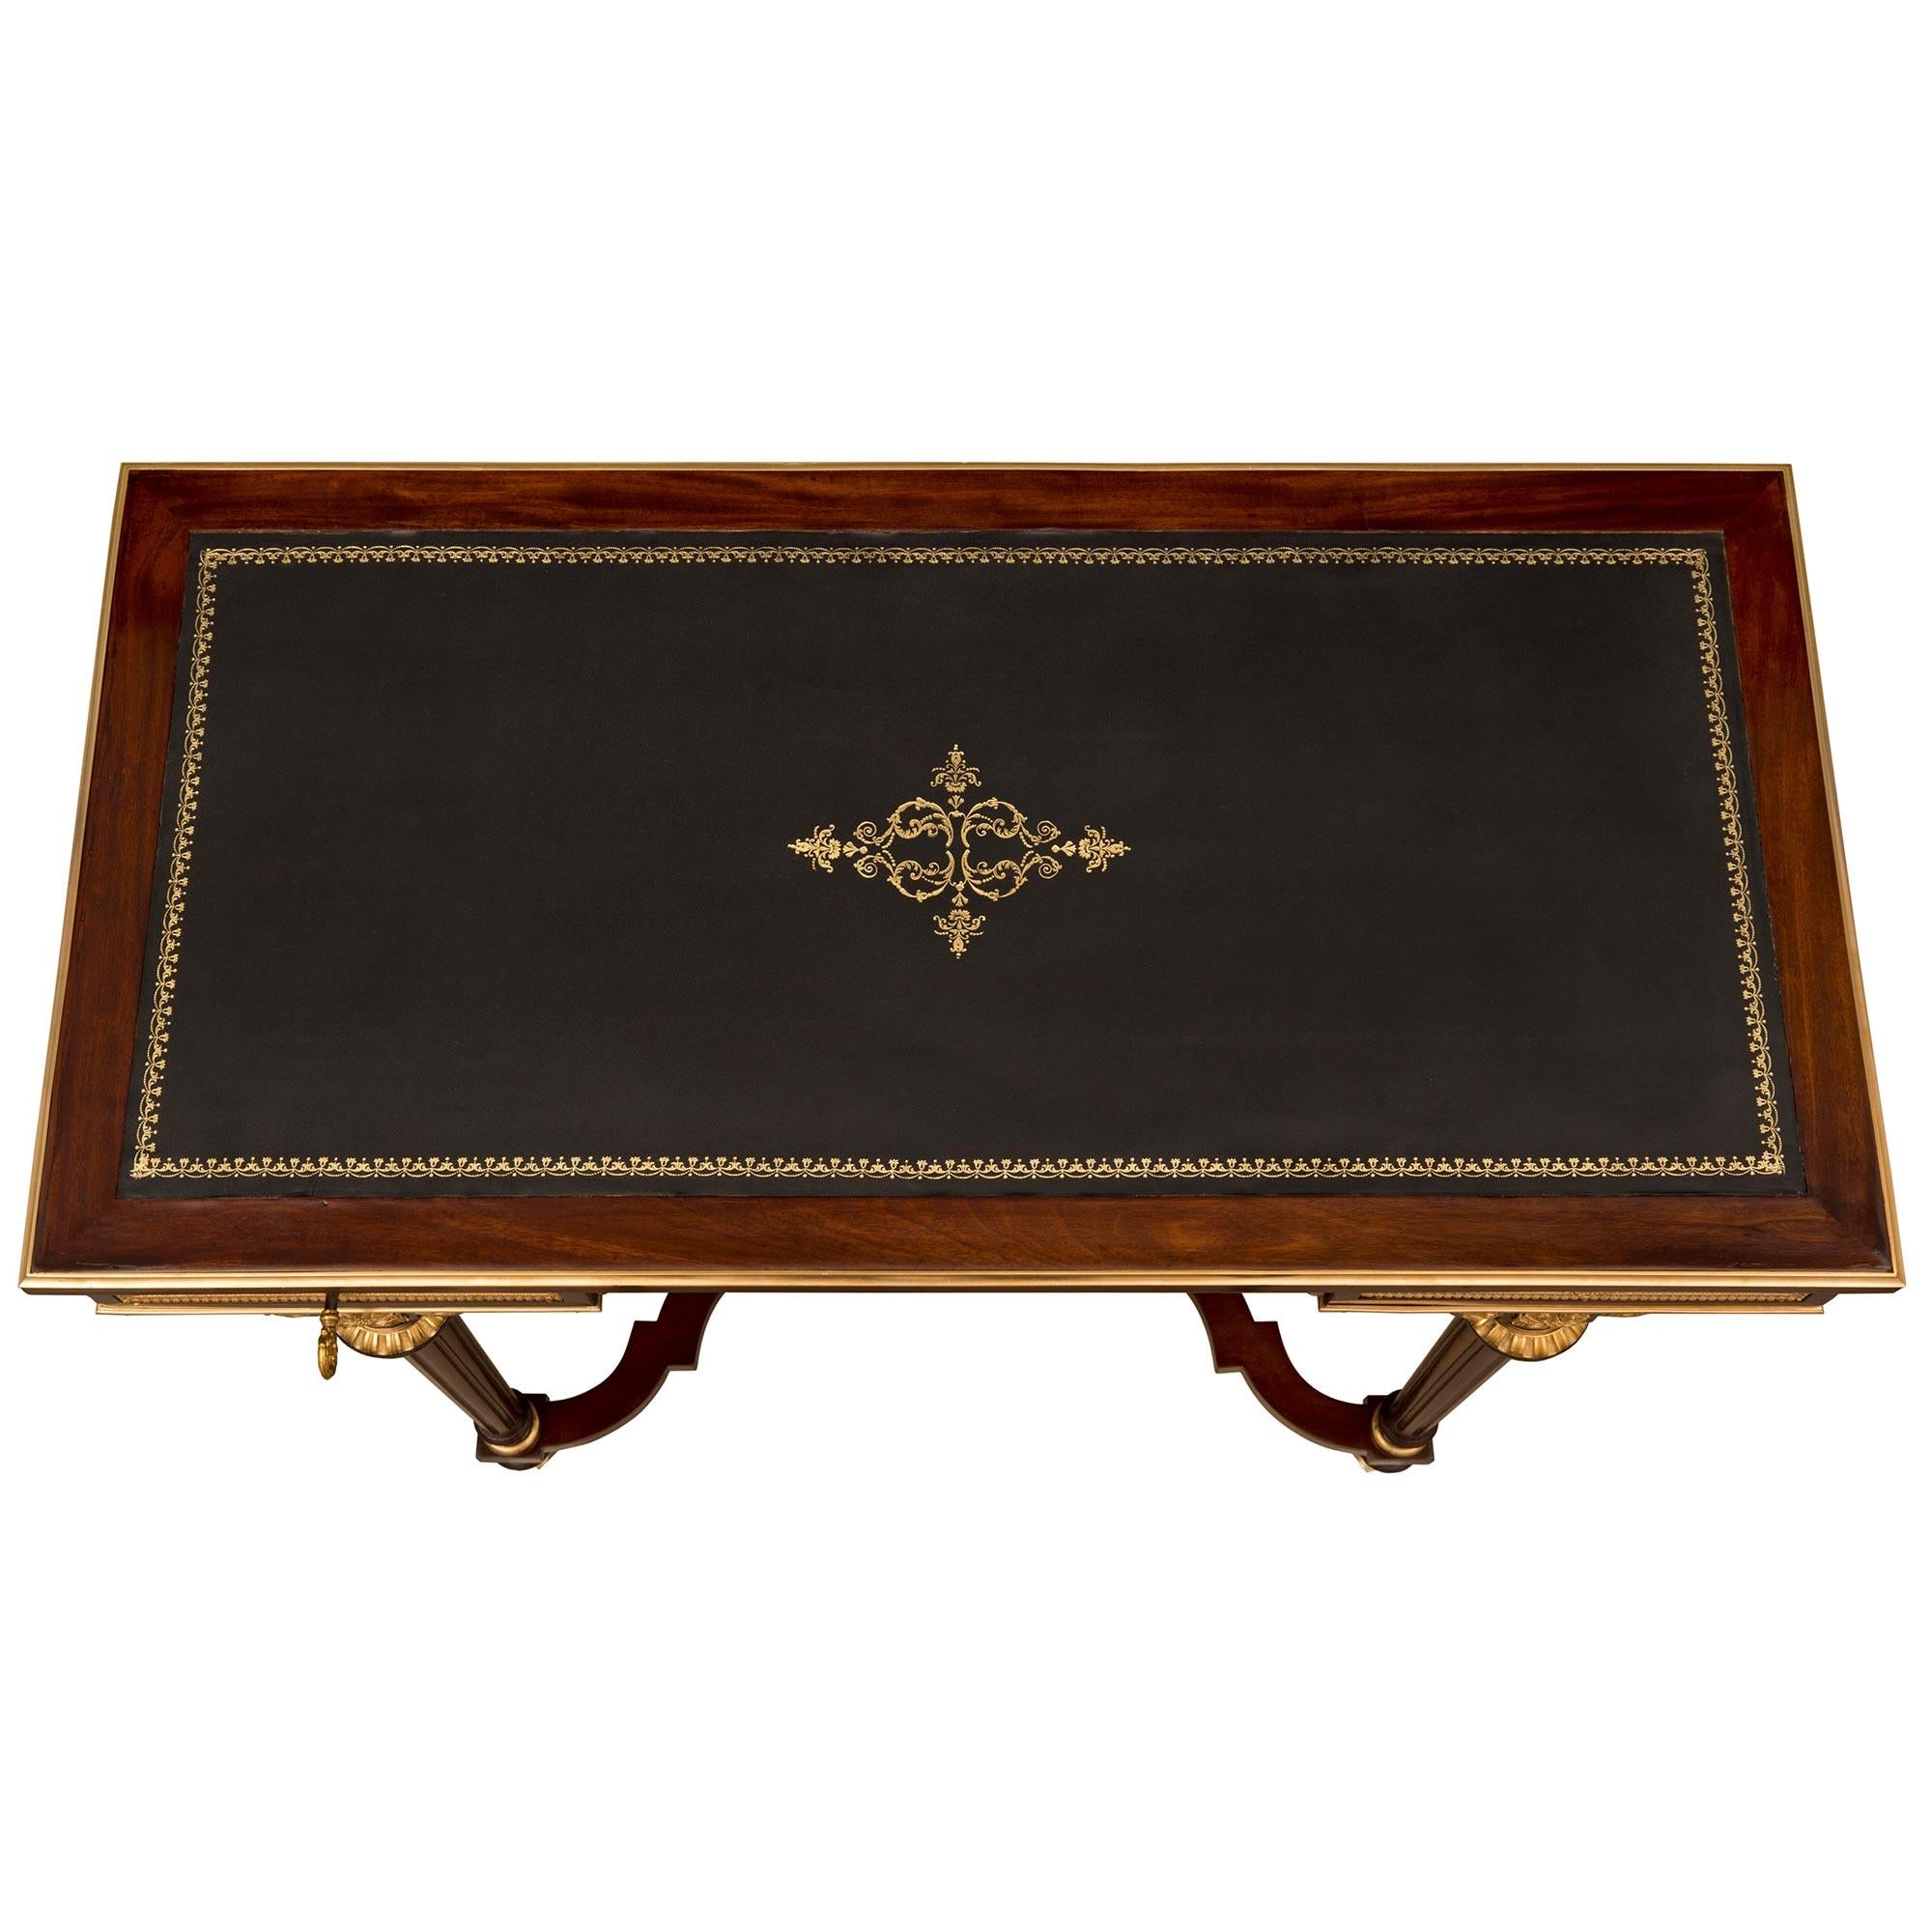 An elegant and most unique French 19th century Louis XVI st. Belle Epoque period mahogany, burl elm, and ormolu desk attributed to Maison Krieger. The two drawer desk is raised by circular tapered fluted legs with ormolu top and bottom caps, and